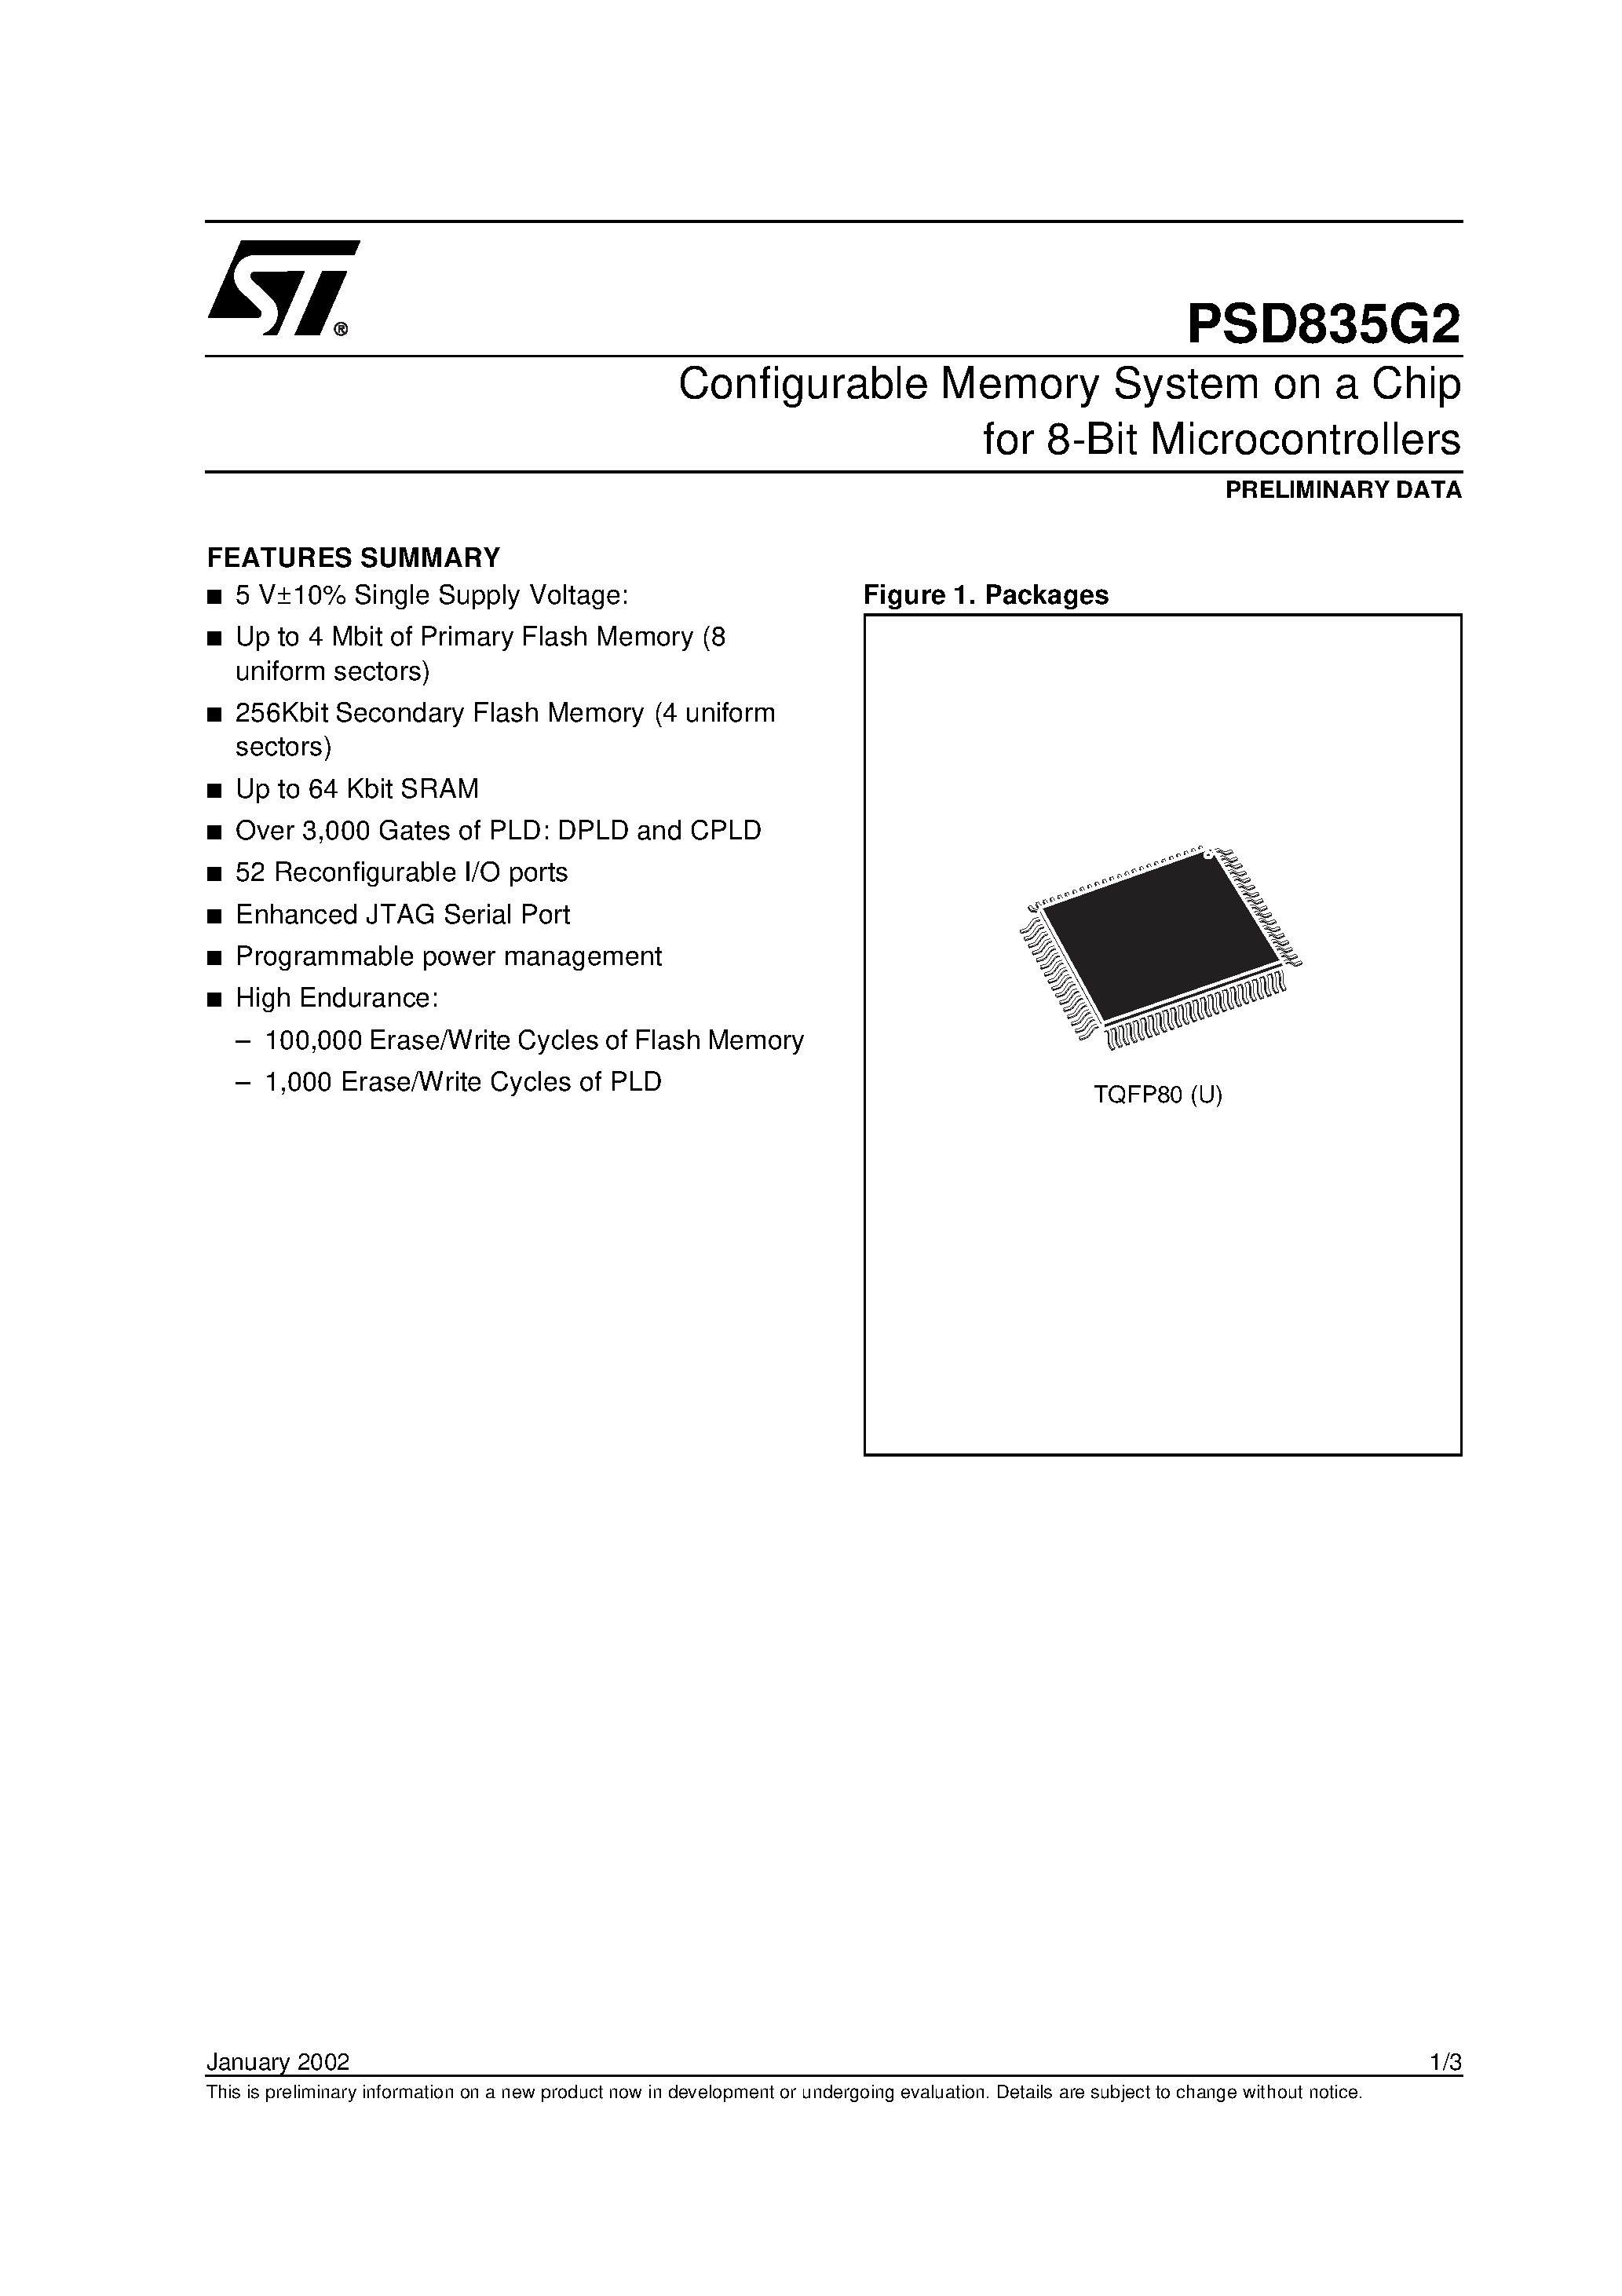 Datasheet PSD835F2V-A-70M - Configurable Memory System on a Chip for 8-Bit Microcontrollers page 1